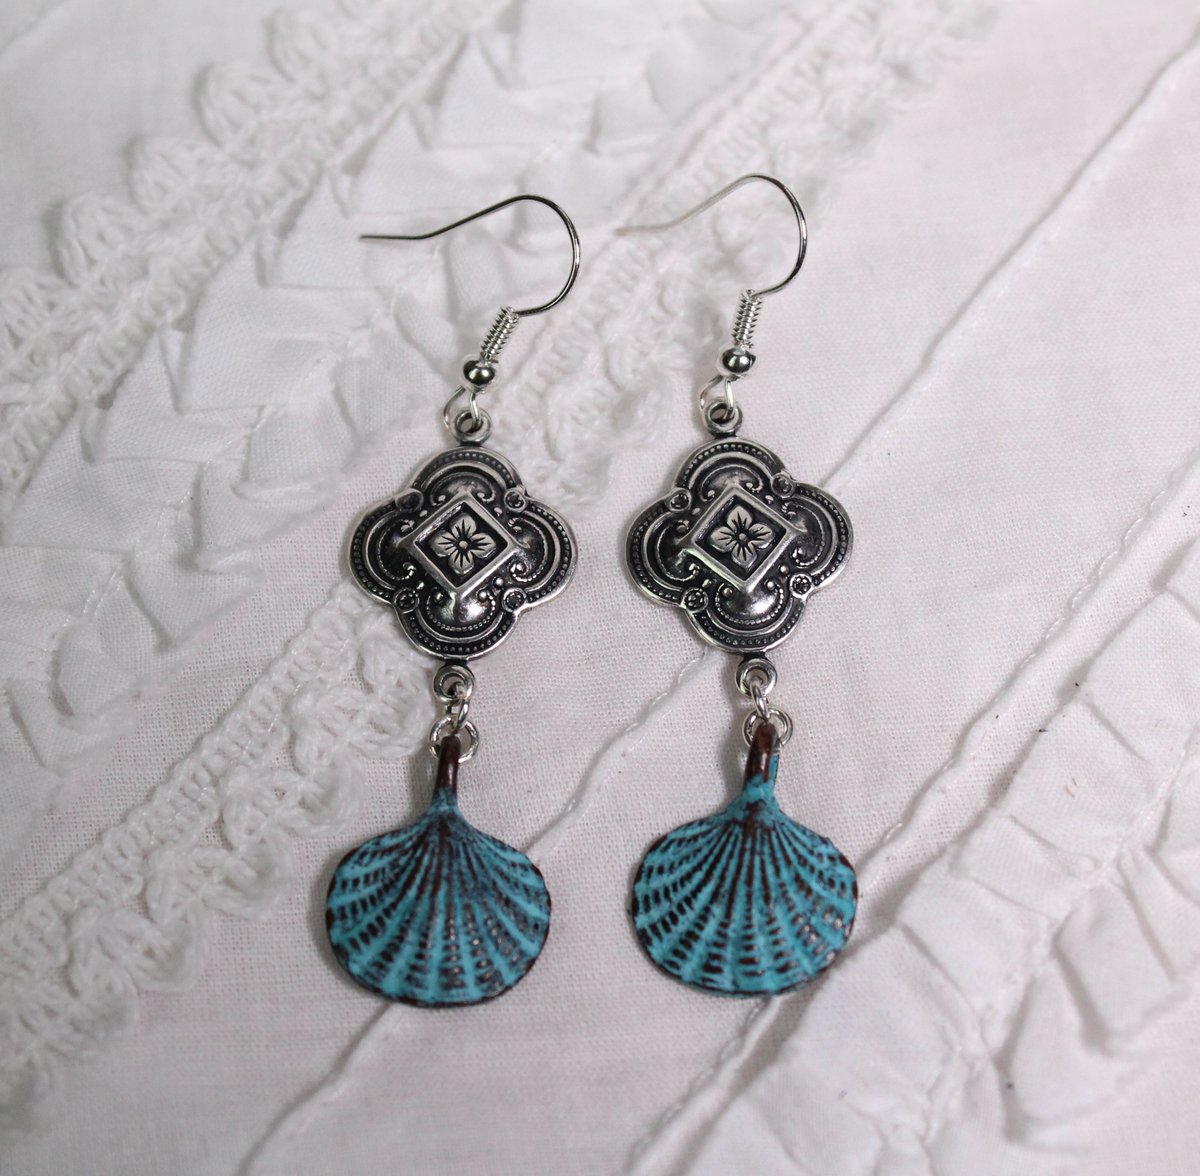 Artisan Mykonos Scallop Shell Earrings w Blue Patina by our Featured Artisan, Hazel Chadbourne Wollbrinck and Available Exclusively at FringeFlowersandFrills.com! RIP Hazel. fringeflowersandfrills.com…/21215881-cd57-…/en_US/…
#Mykonos #seashells #seashellearrings #patina #handmade